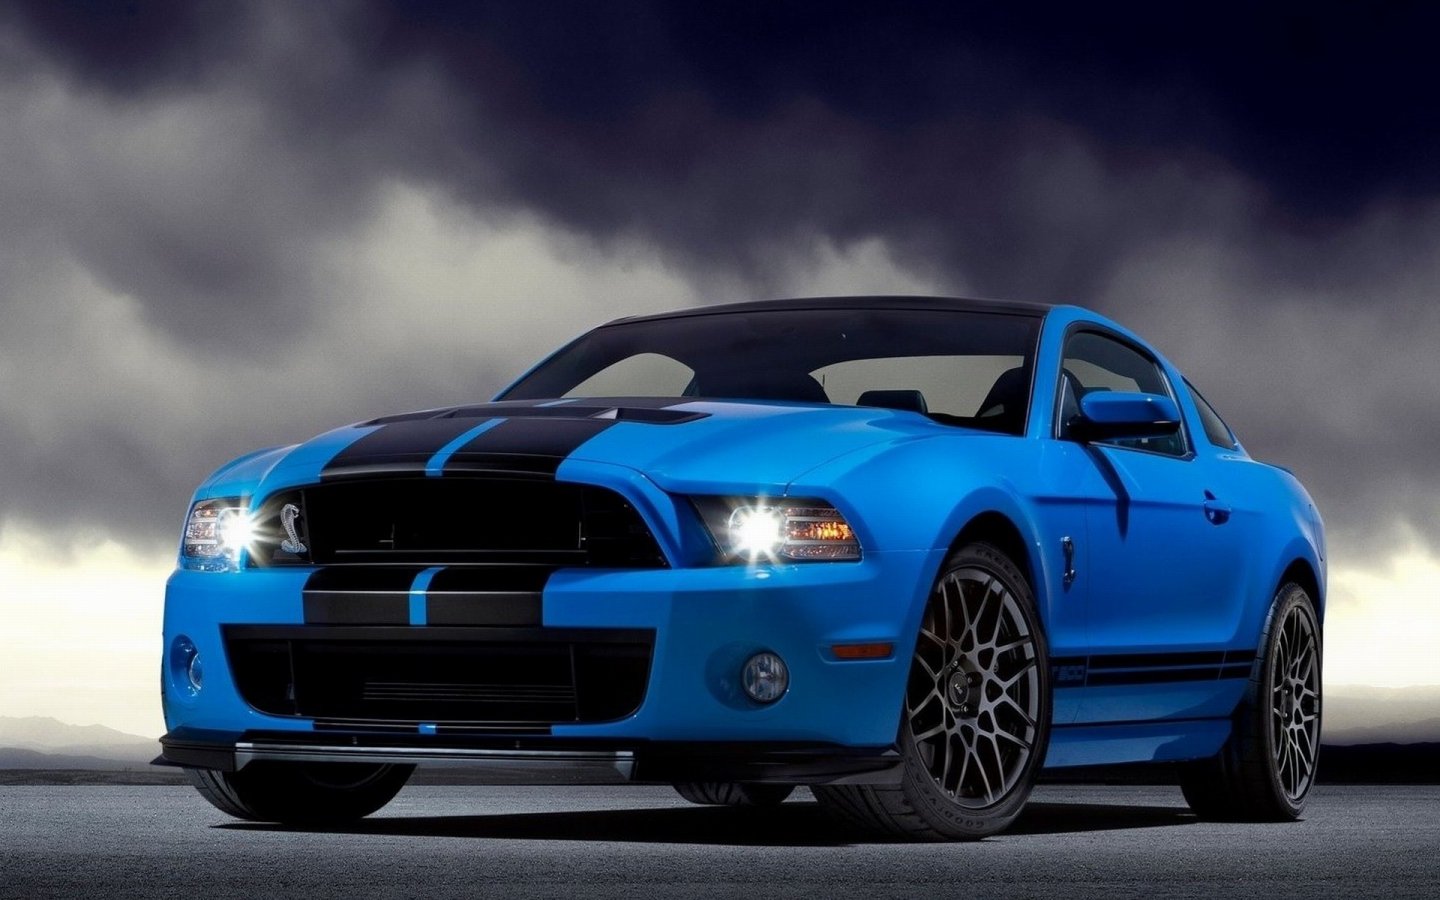 Ford Mustang Shelby GT500 2013 1440x900 WallpapersFord Mustang